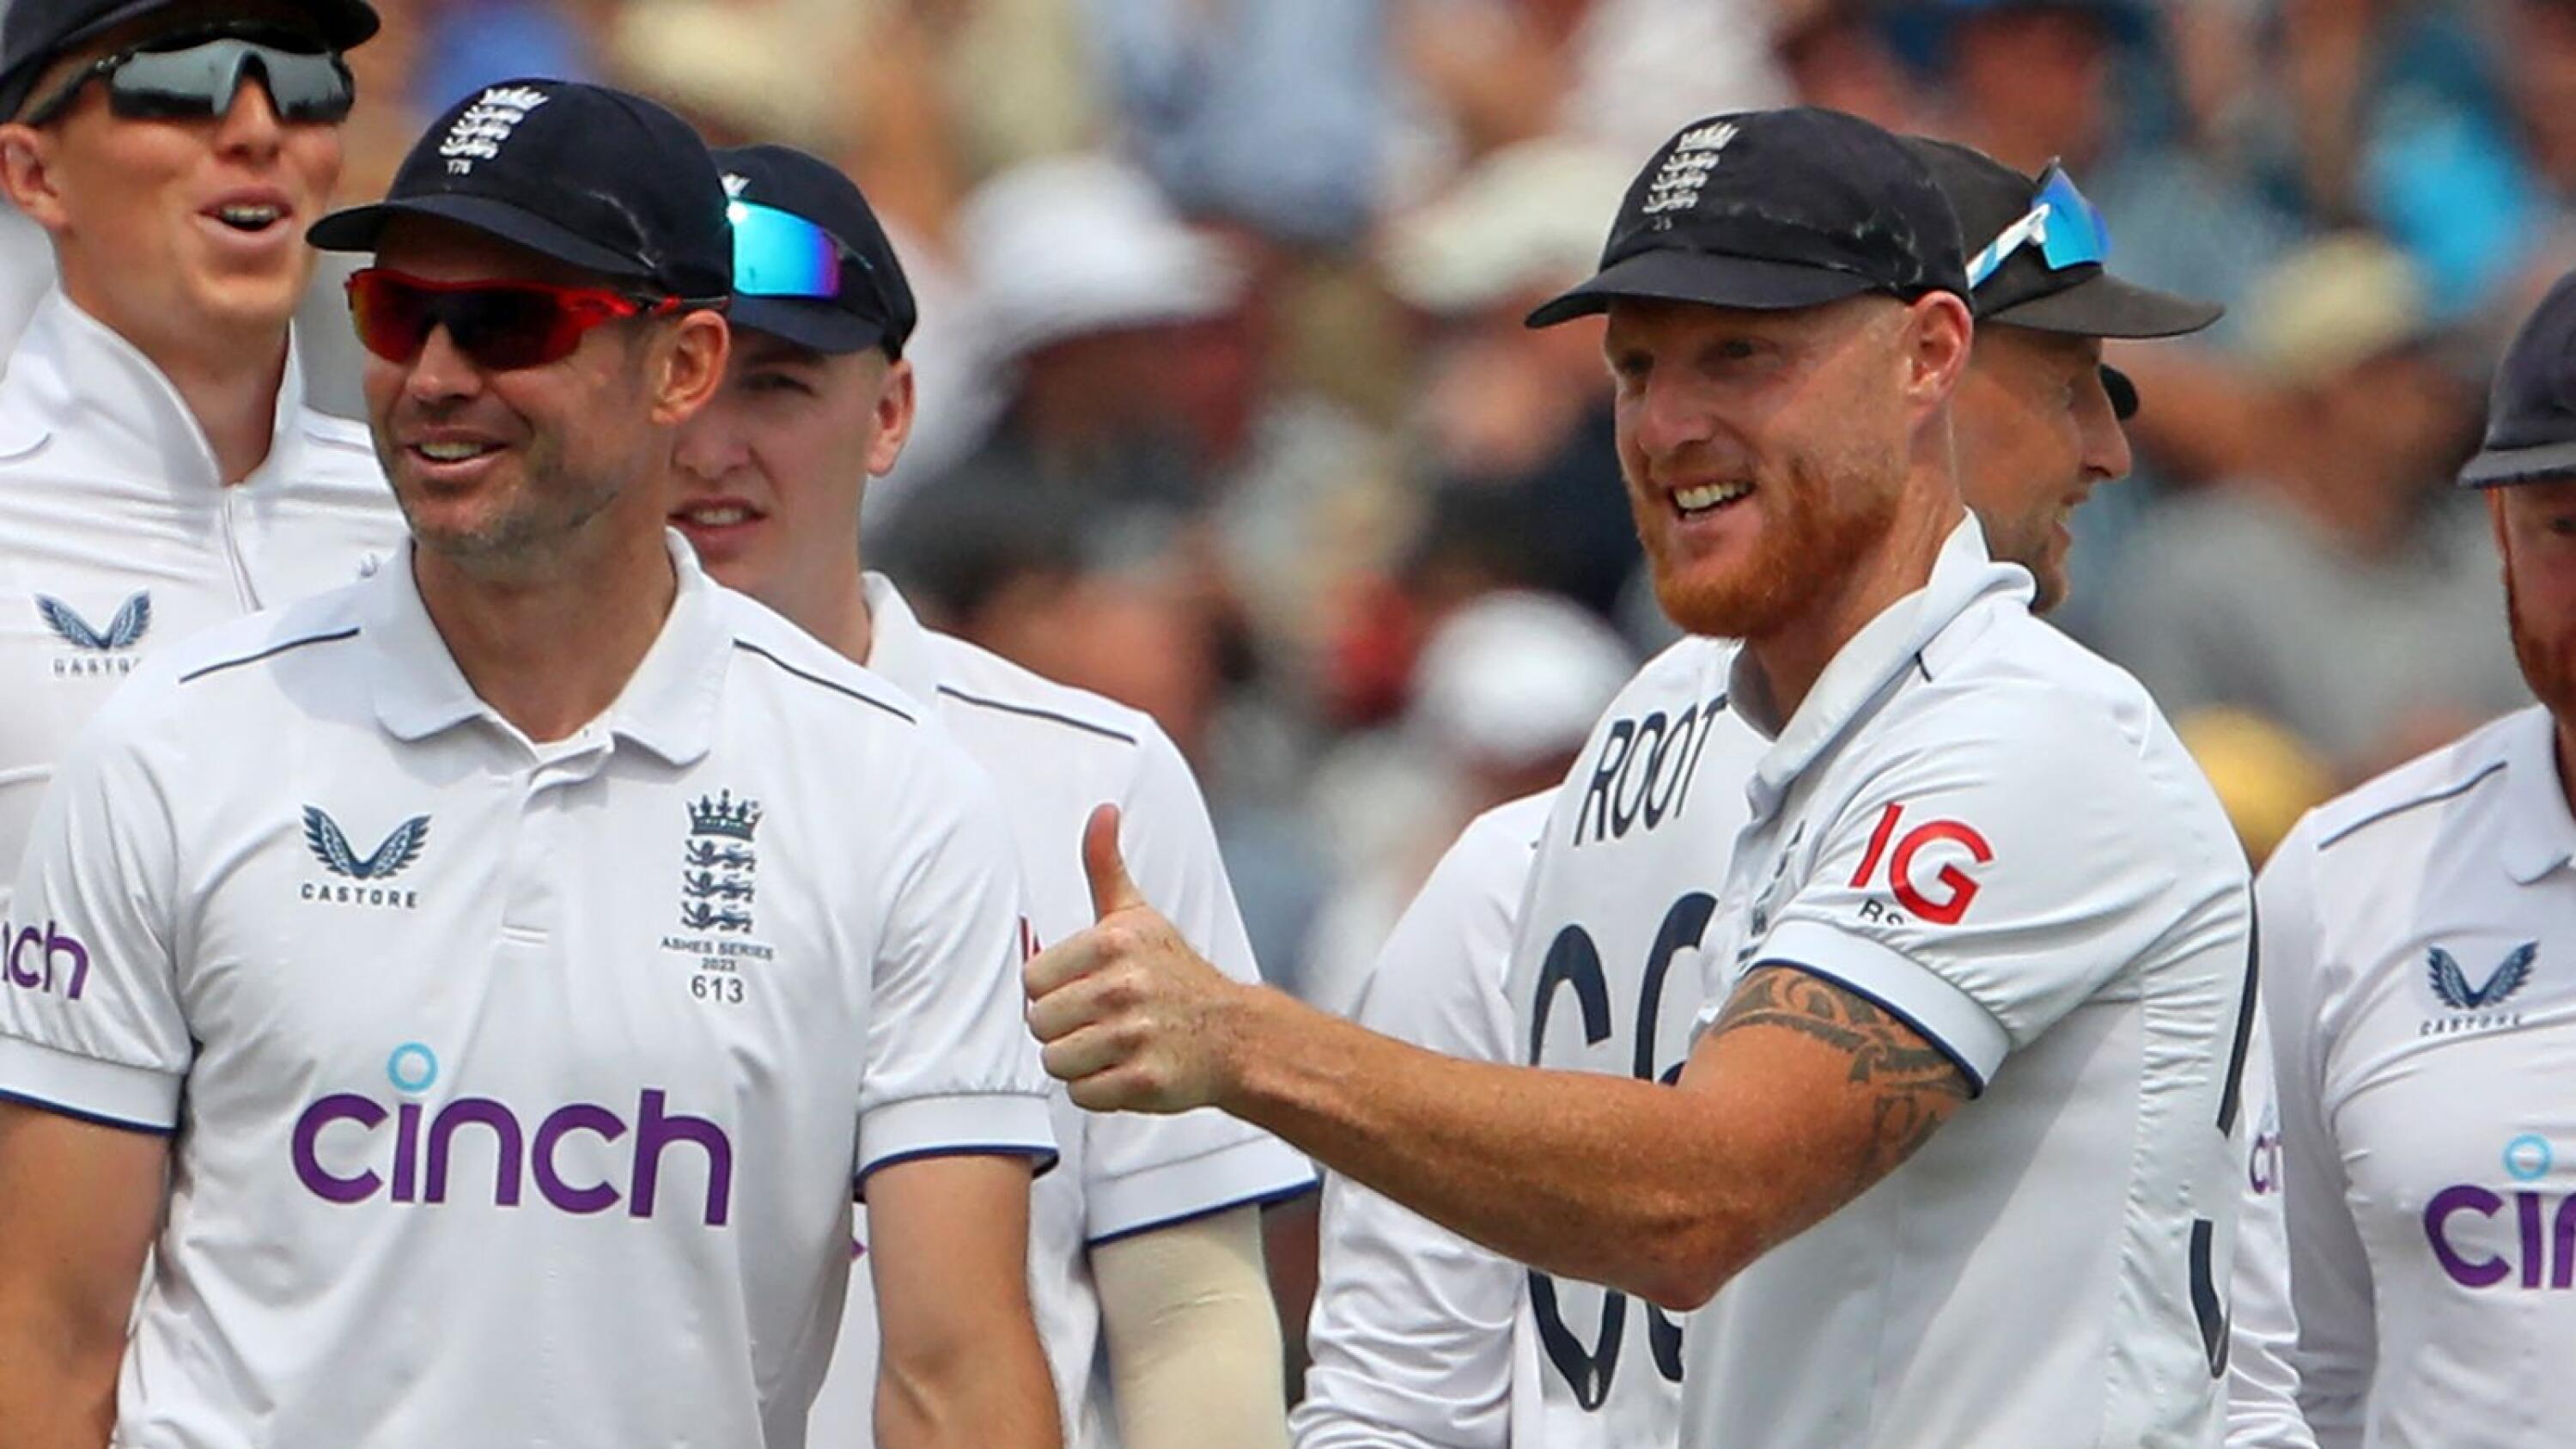 England captain Ben Stokes gives a thumbs-up sign after Ollie Robinson took Australia's Usman Khawaja during the first Ashes Test